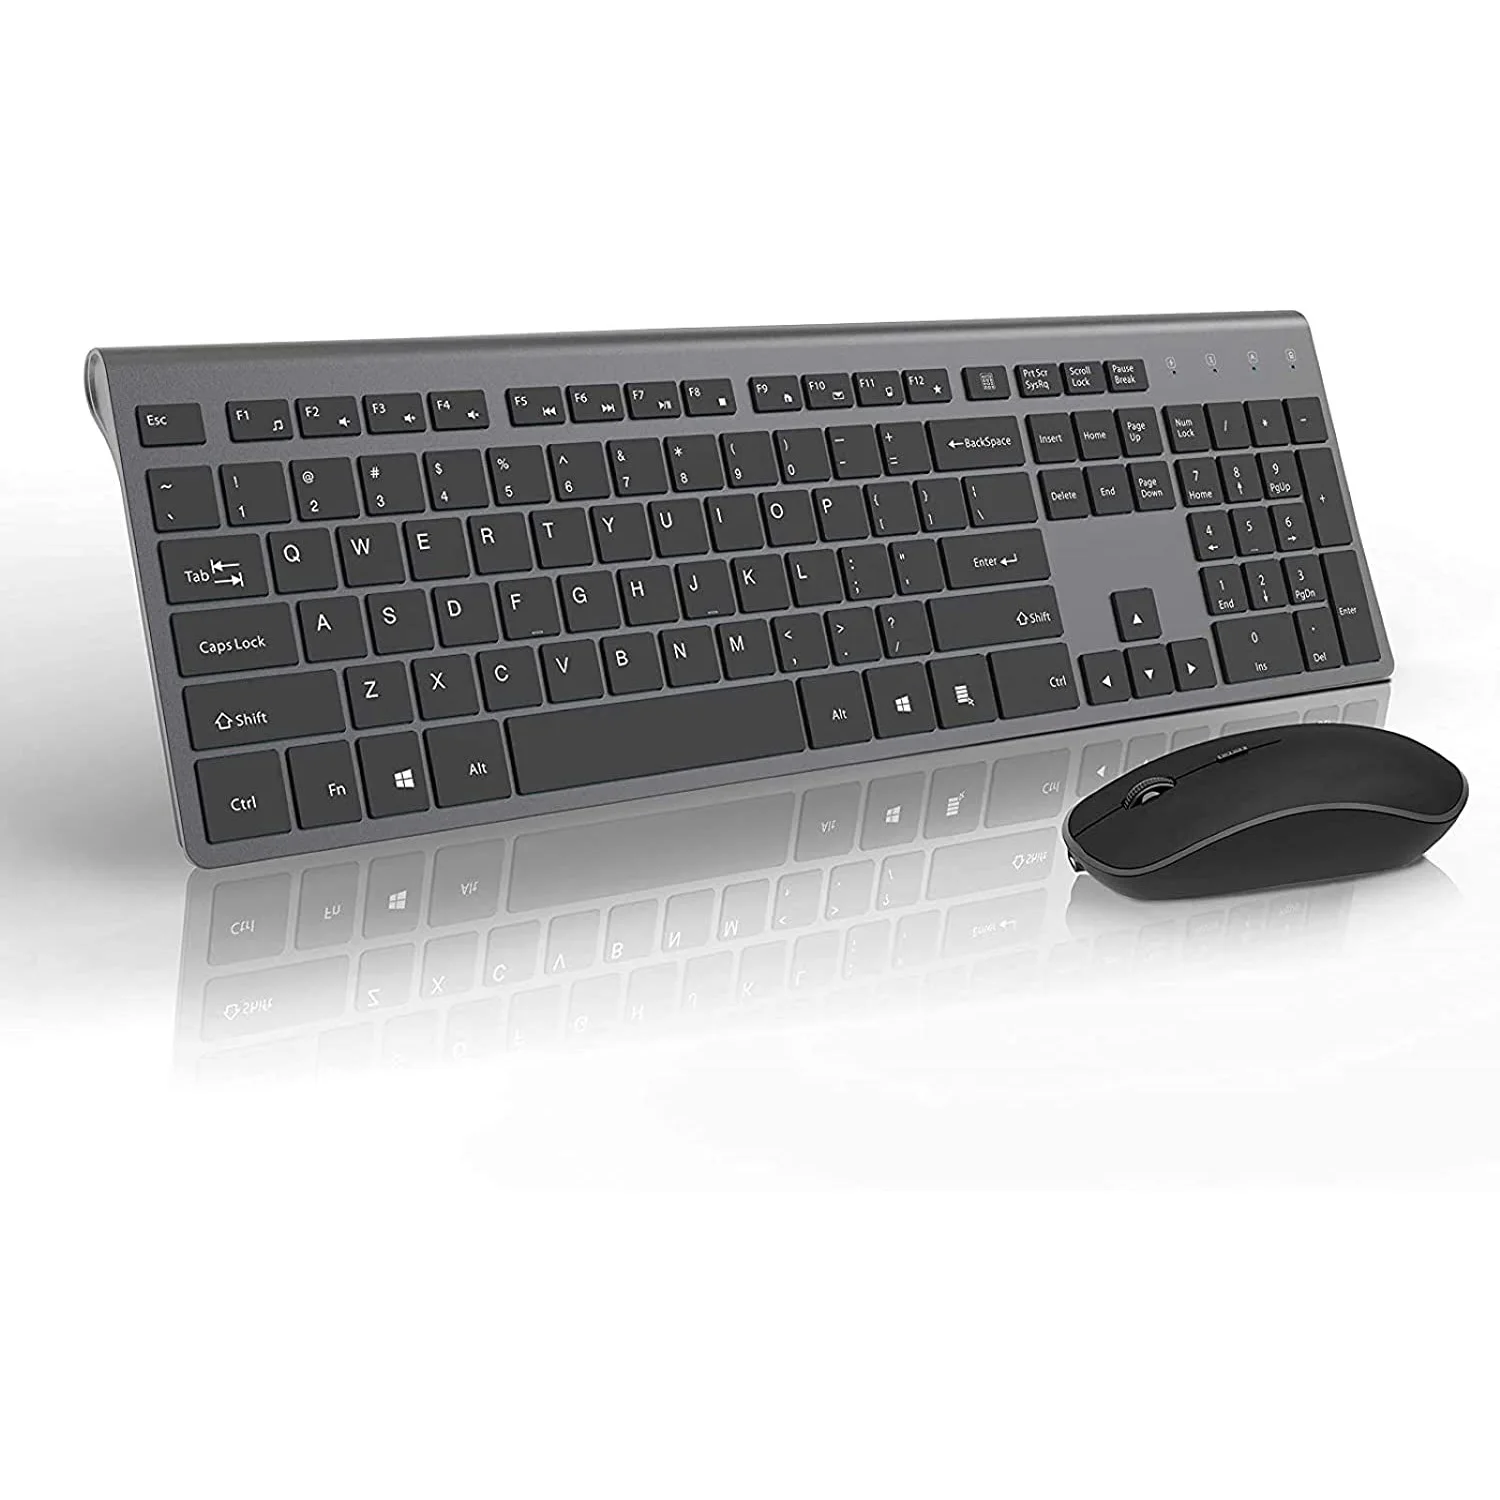 Rechargeable Wireless Keyboard Mouse 2.4G Full Size Thin Ergonomic And Compact Design For Laptop, PC, Desktop,Computer, Windows